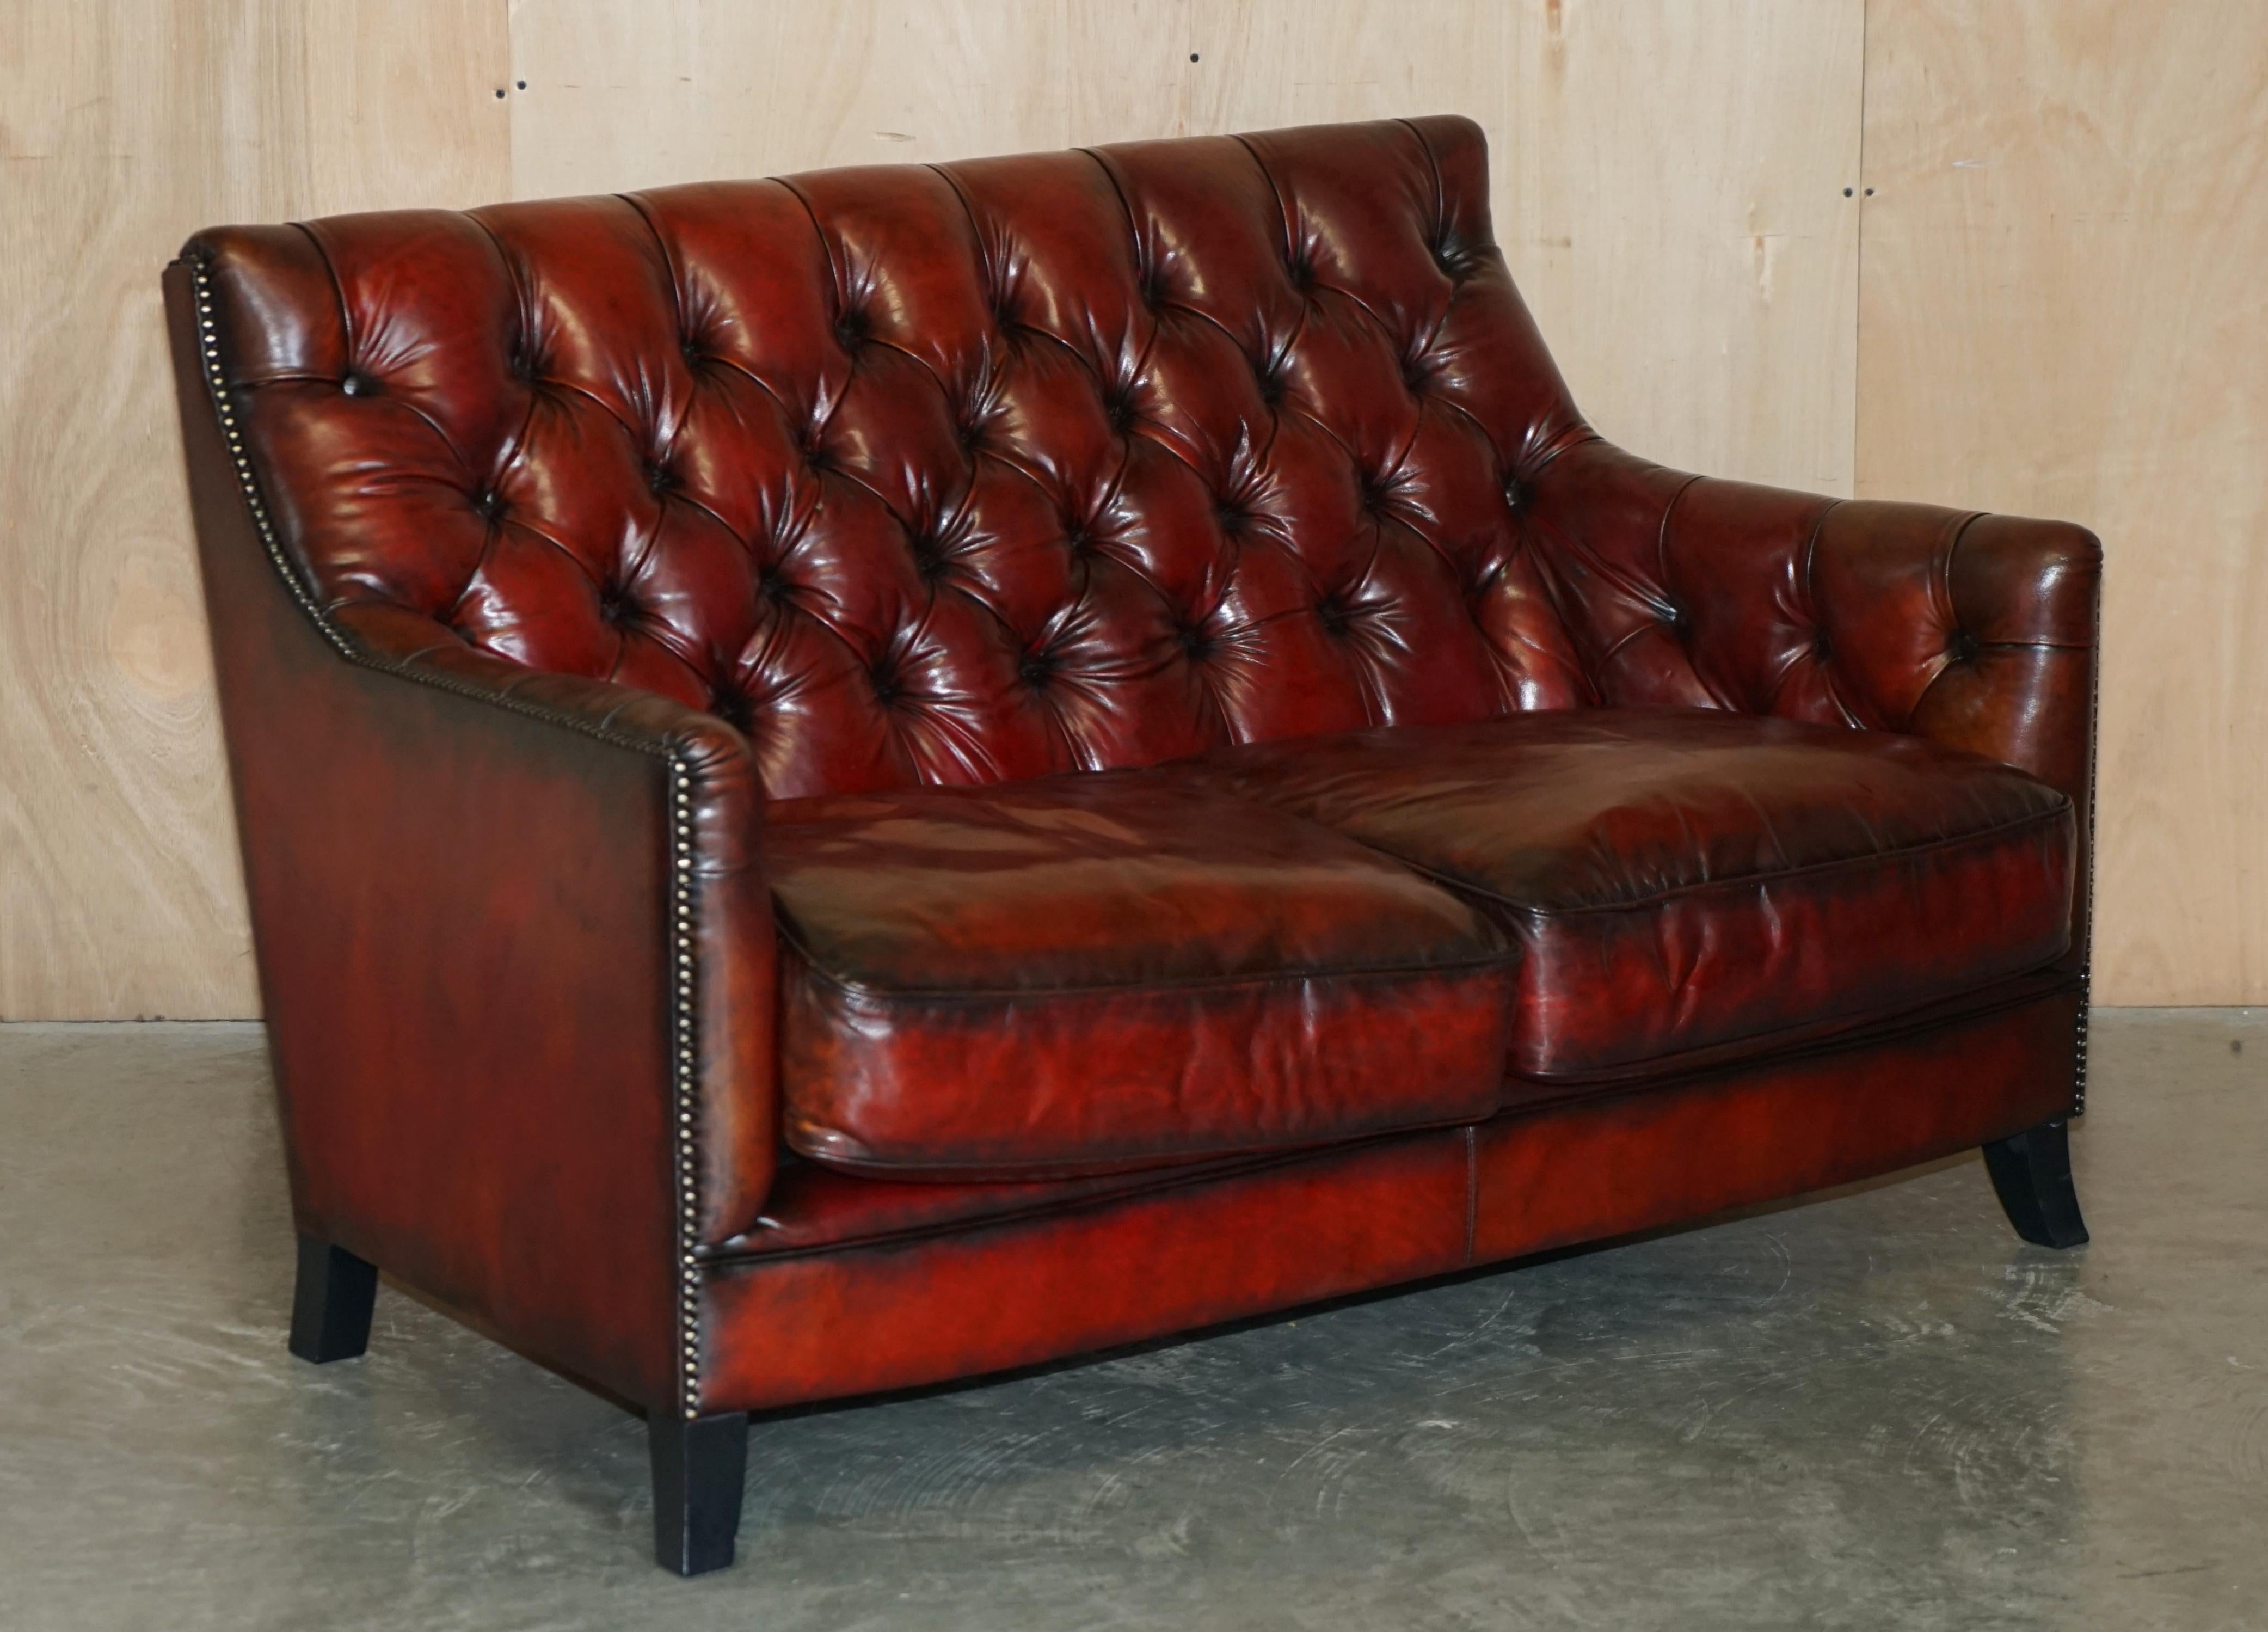 We are delighted to offer for sale this stunning, hand made in England, fully restored Bordeaux leather Gentleman's club suite with to include a very comfortable armchair and footstool with matching two seat sofa

Please note the delivery fee